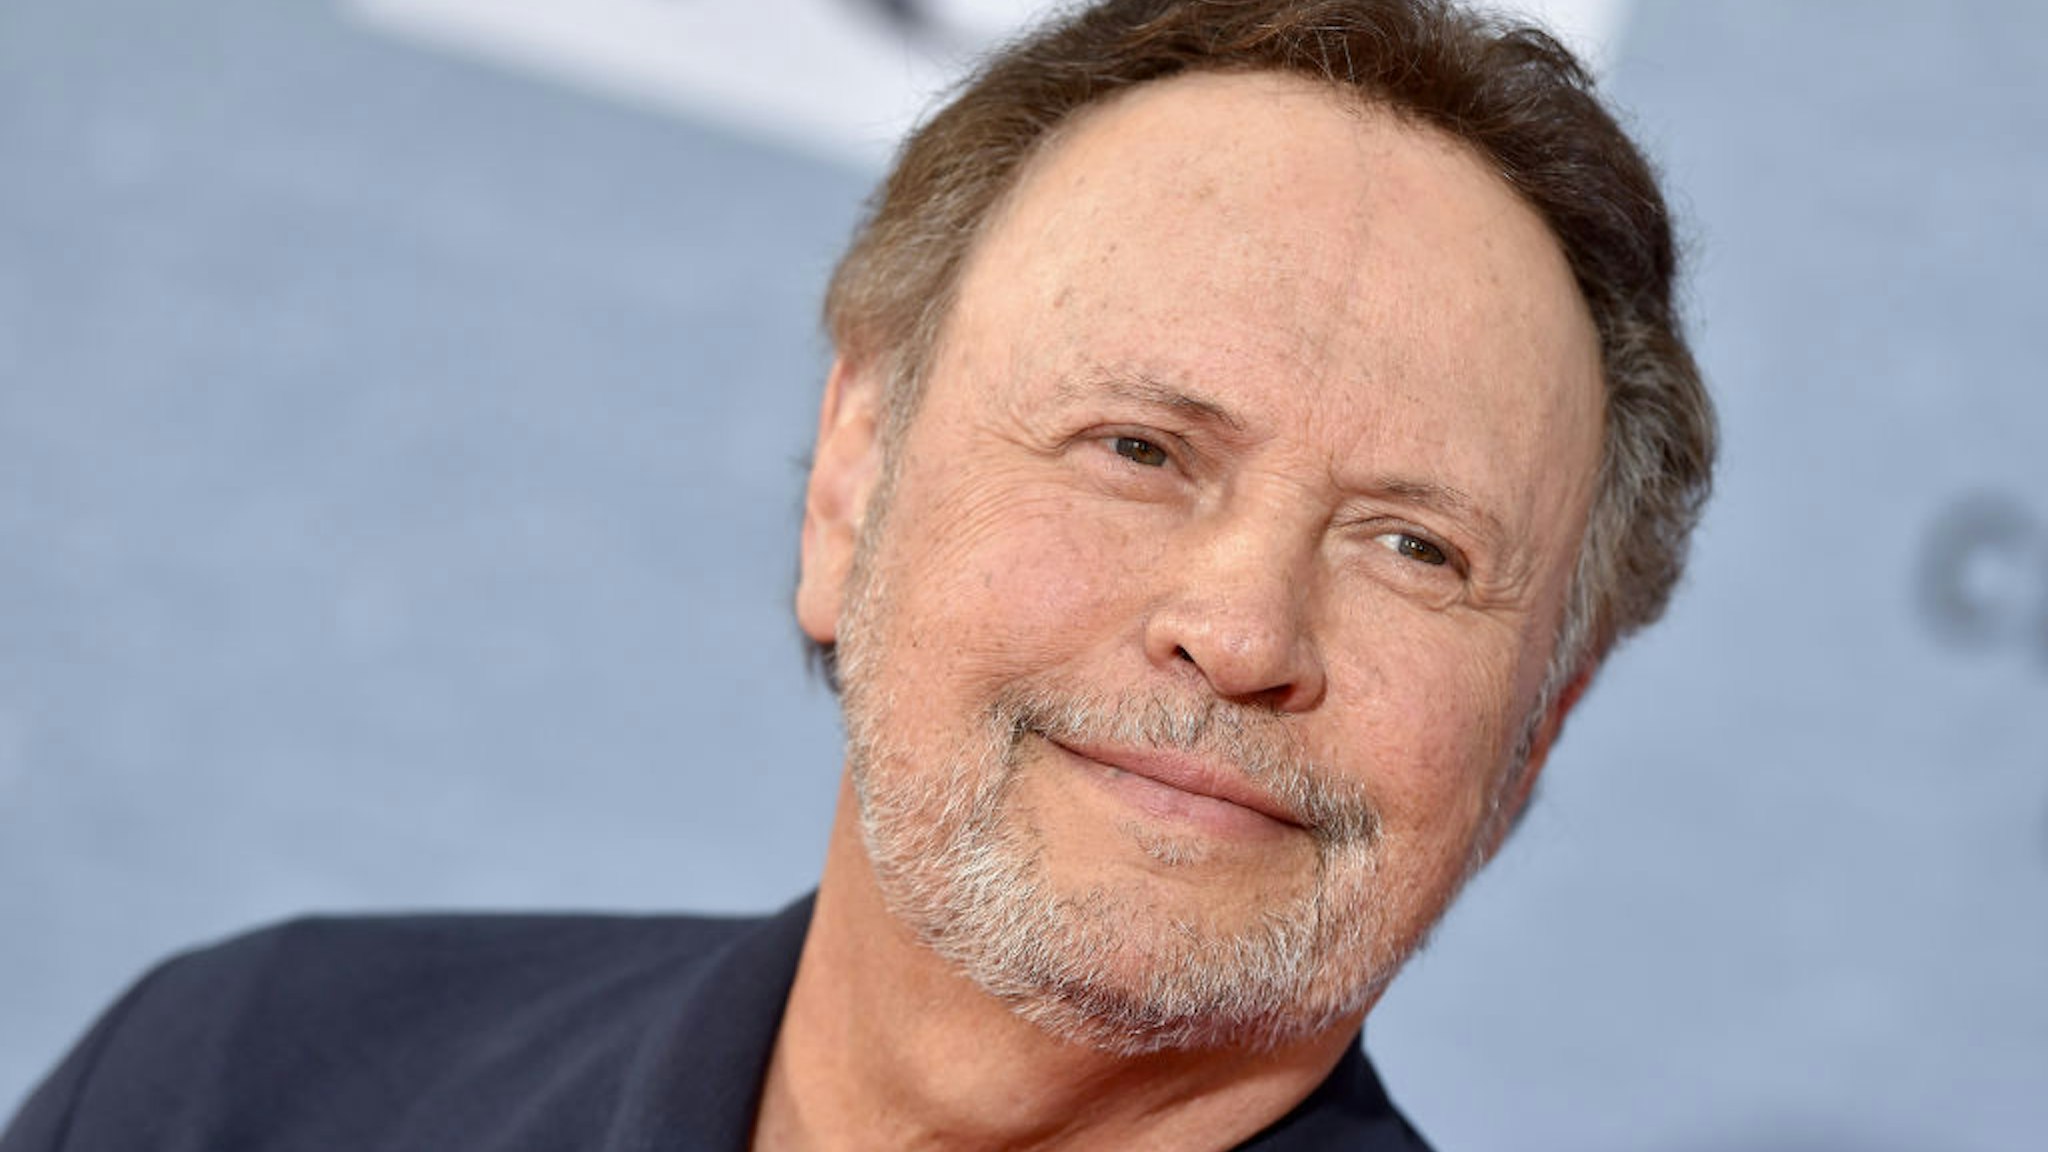 HOLLYWOOD, CALIFORNIA - APRIL 11: Billy Crystal attends the 2019 TCM Classic Film Festival Opening Night Gala and 30th Anniversary Screening of 'When Harry Met Sally' at TCL Chinese Theatre on April 11, 2019 in Hollywood, California. (Photo by Axelle/Bauer-Griffin/FilmMagic)